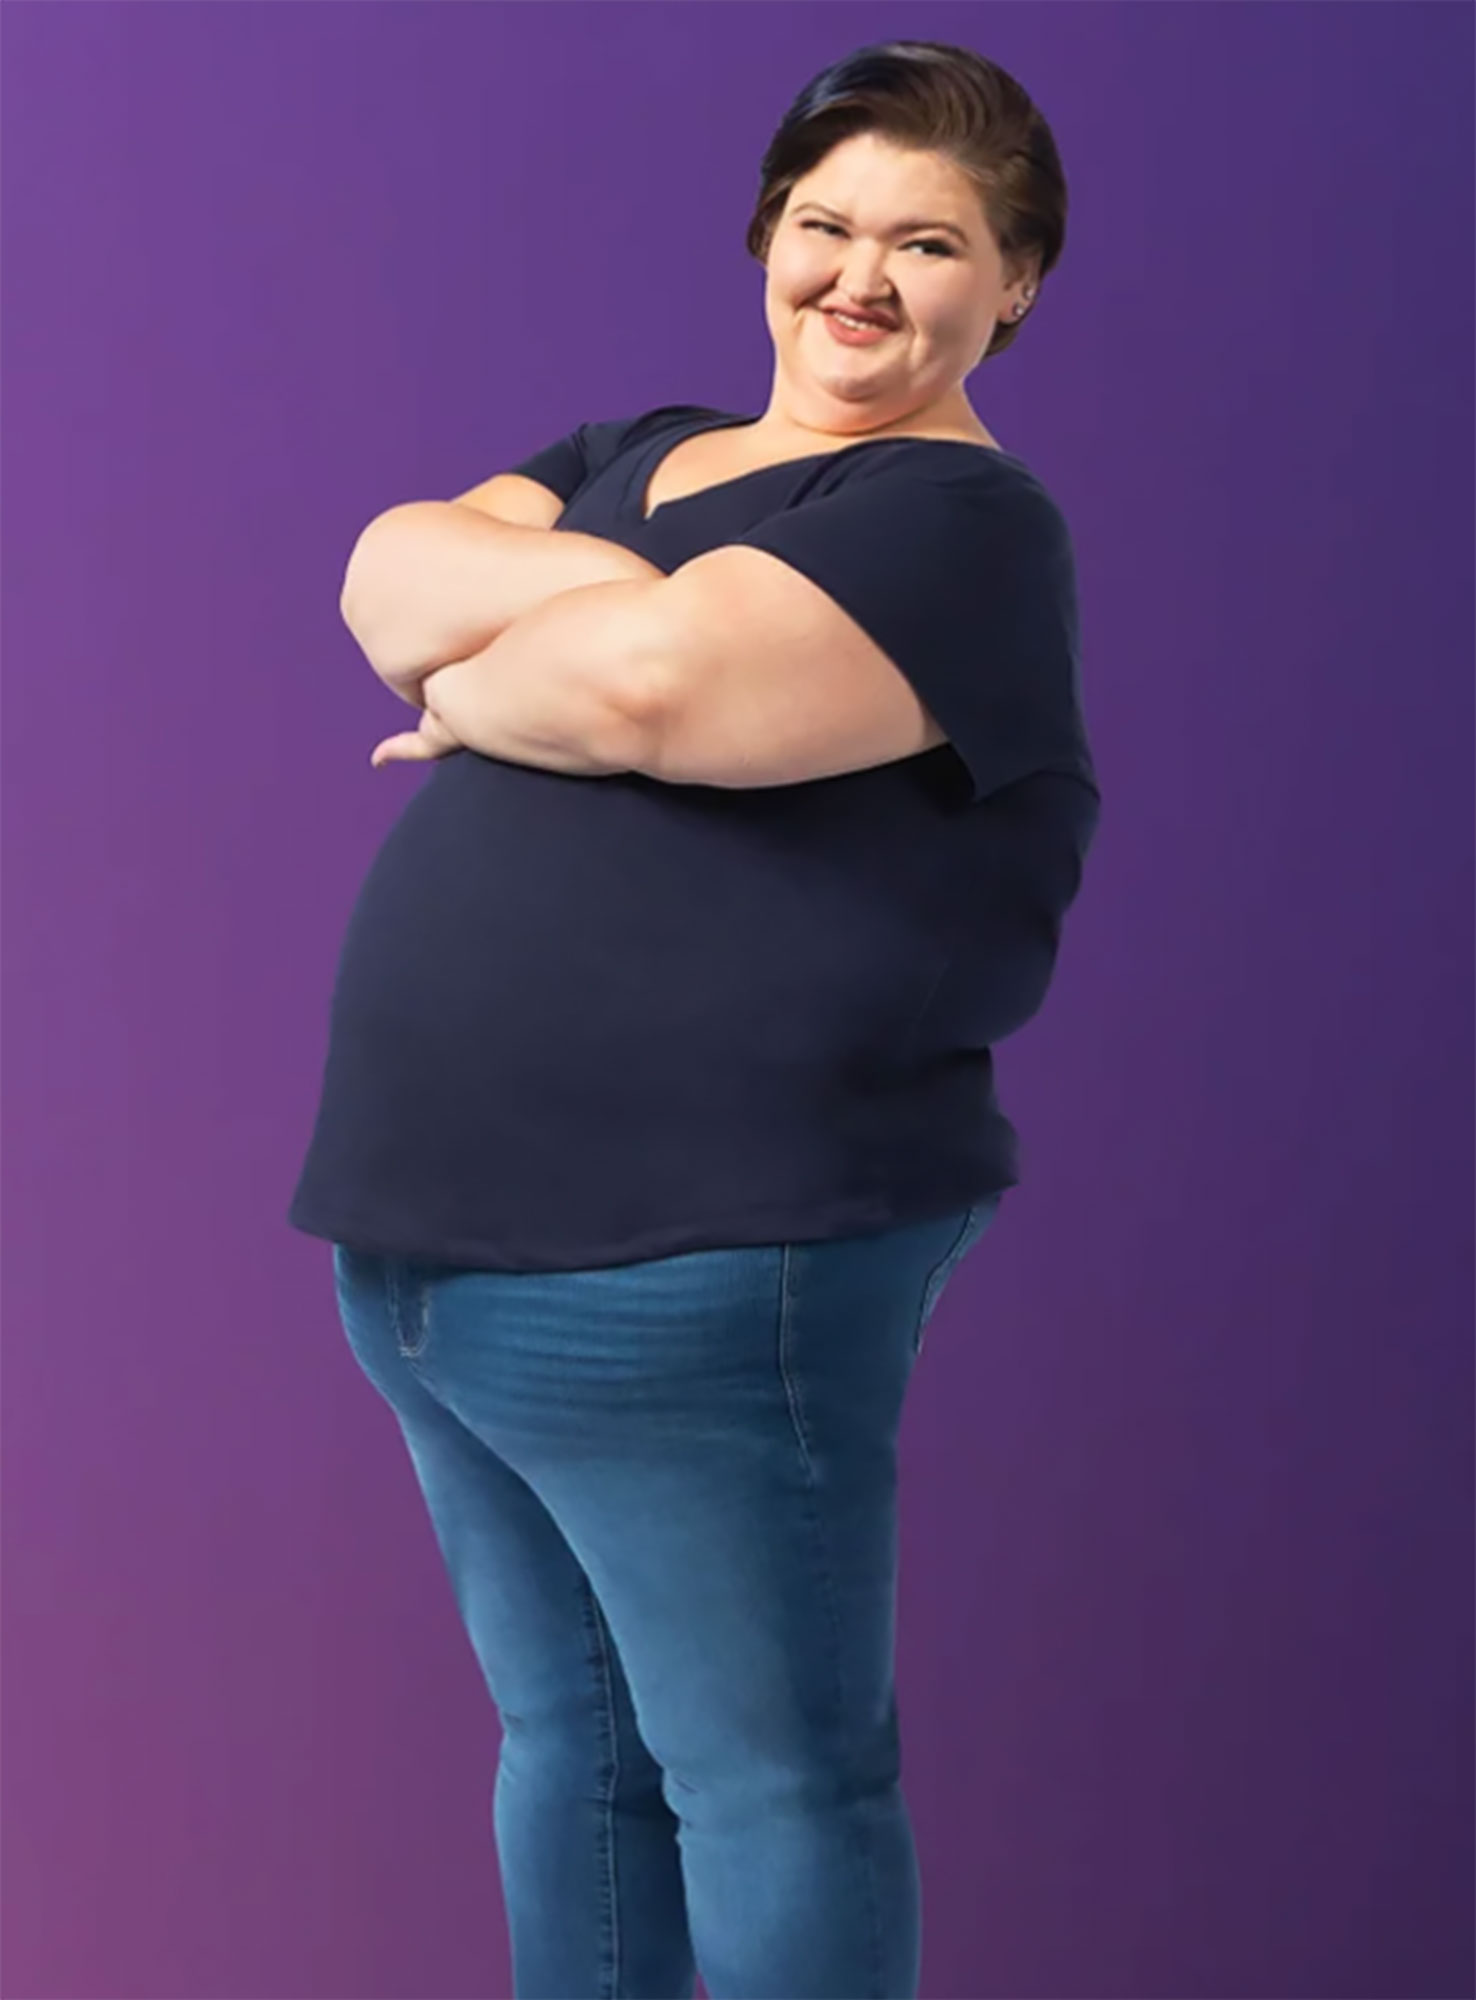 ‘1000-Lb. Sisters’ Star Amy Slaton’s Weight Loss Transformation From Season 1 to Now navy blue shirt